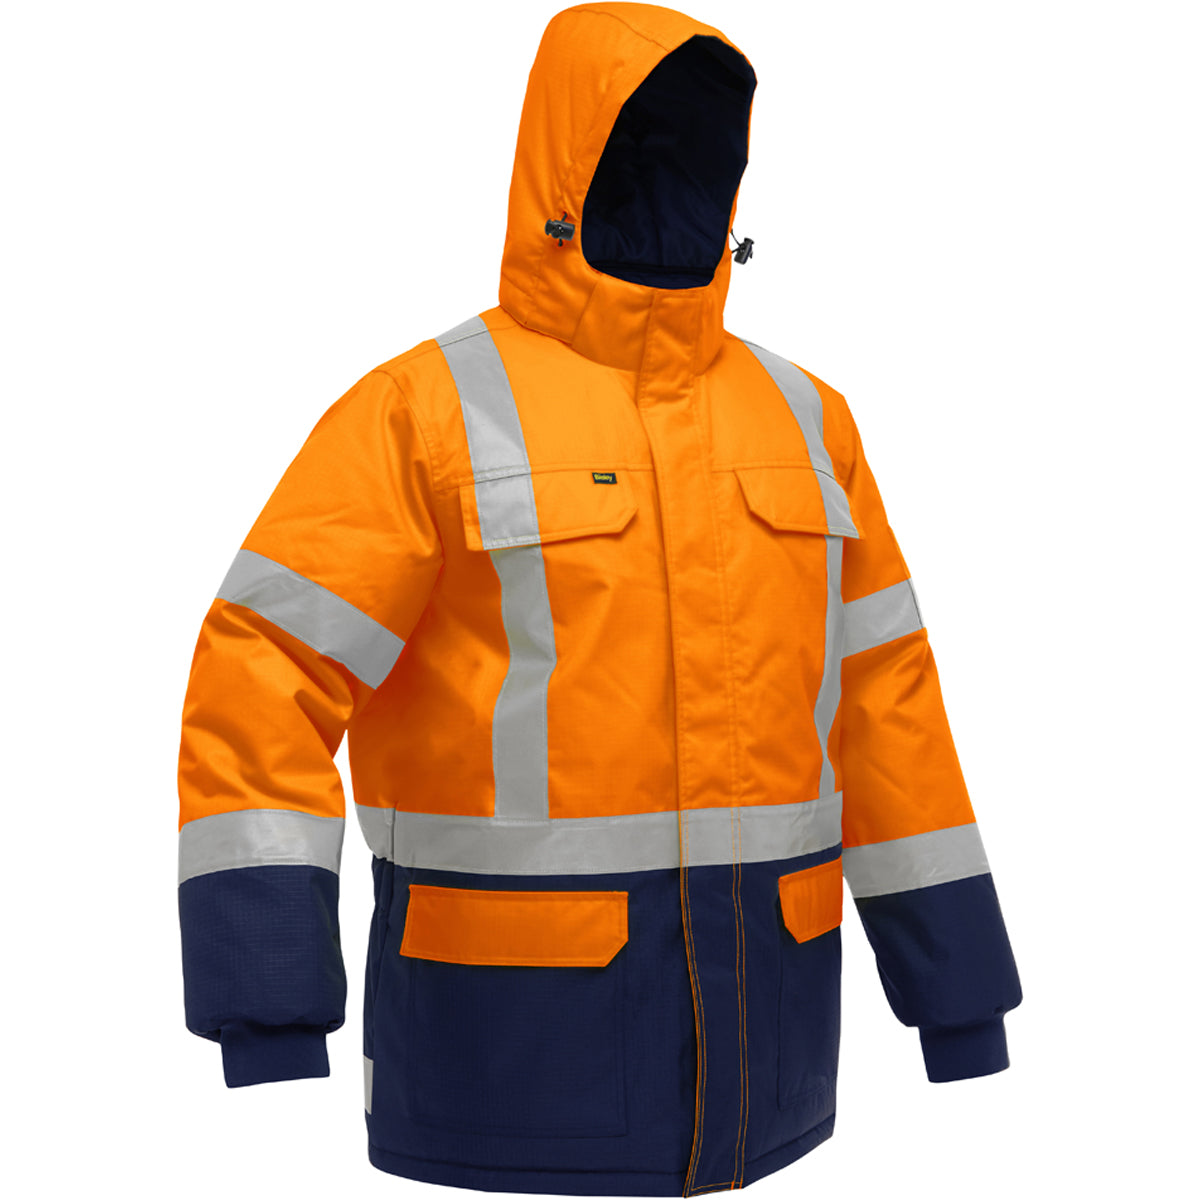 These Bisley® Extreme Cold Hi-Vis Orange ANSI 107 Class R3 Industrial Work Jackets are engineered with high-performance bio-based recycled materials to provide advanced thermal protection against extreme cold climate hazards while diverting plastic water bottles from landfill. 